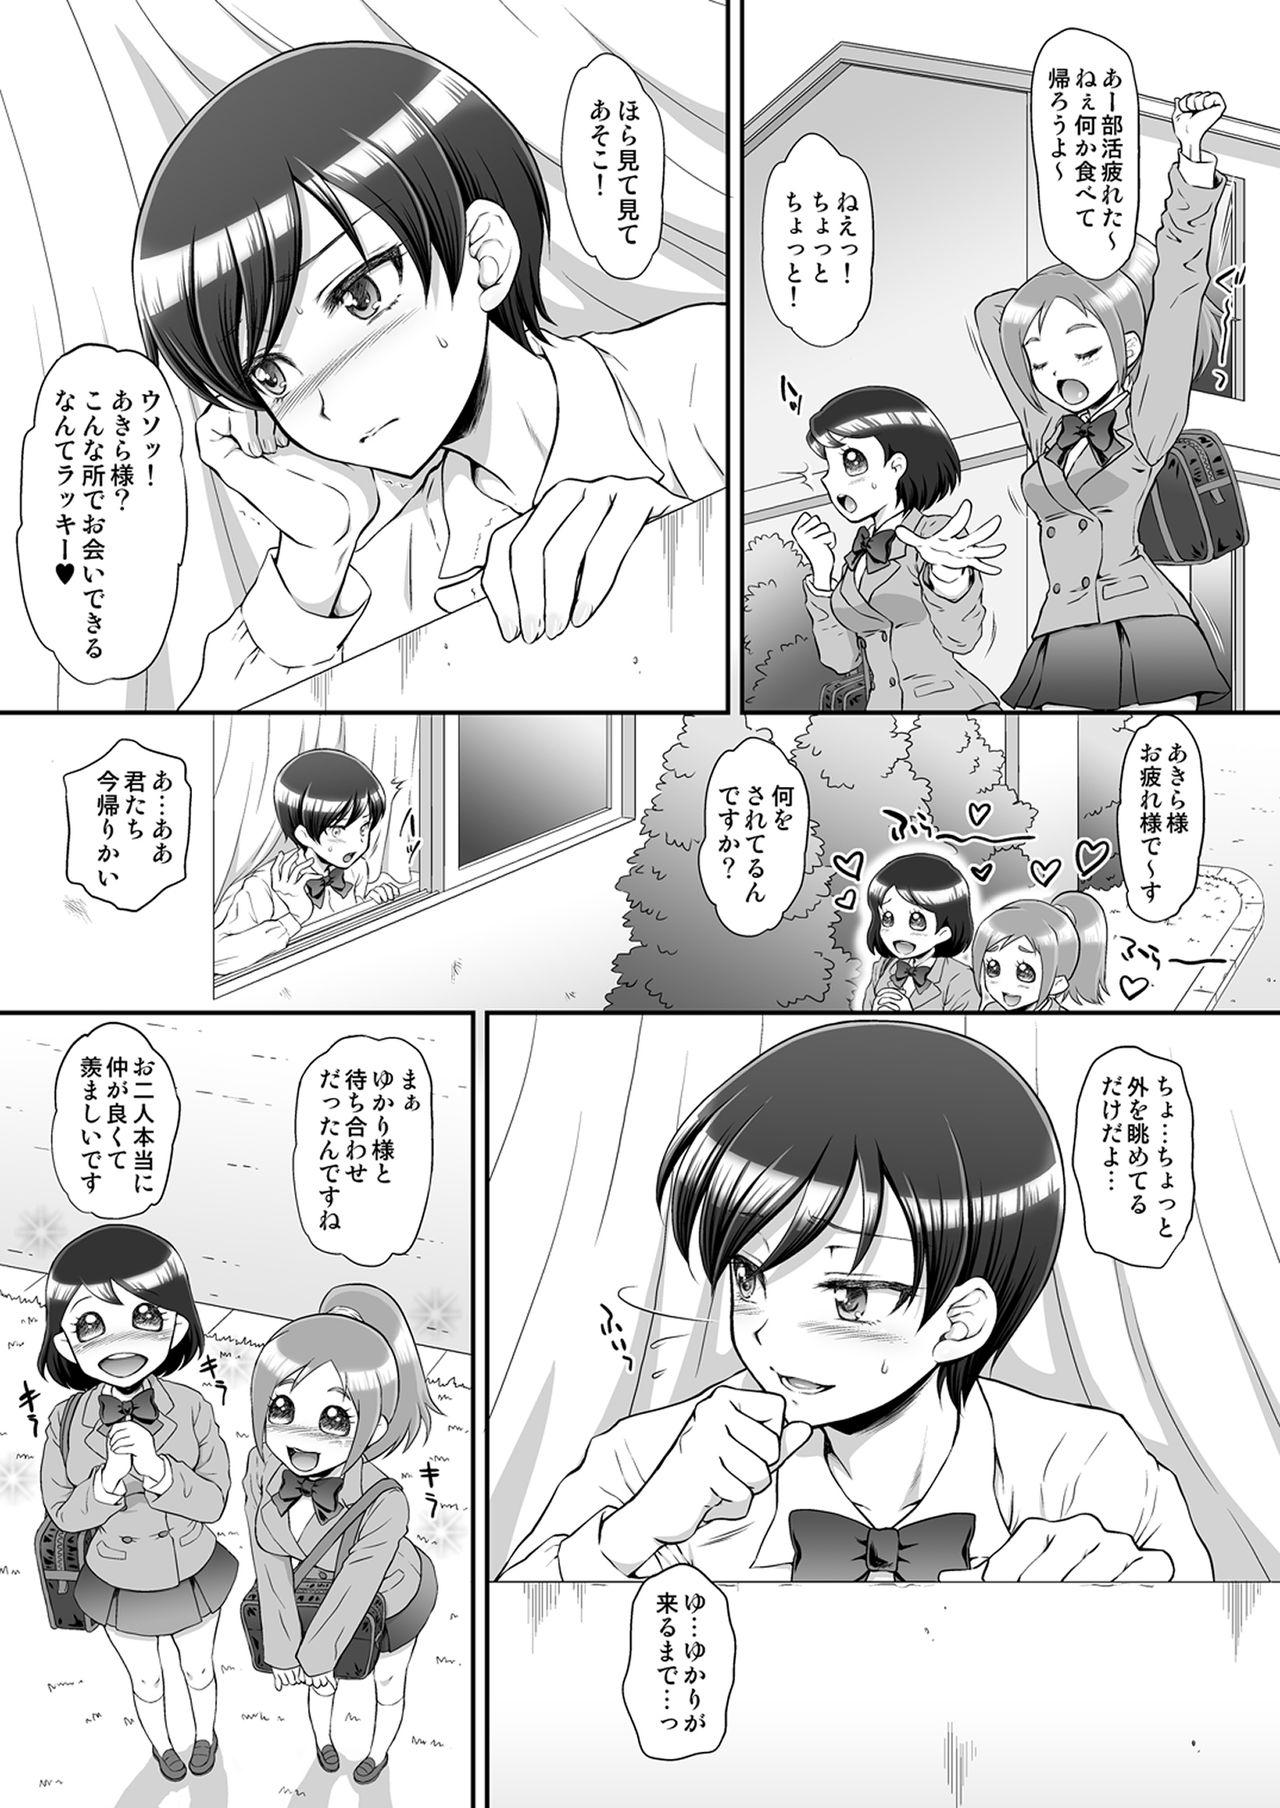 Cum In Mouth Omakebon Collection 2 - Pretty cure Female Domination - Page 3